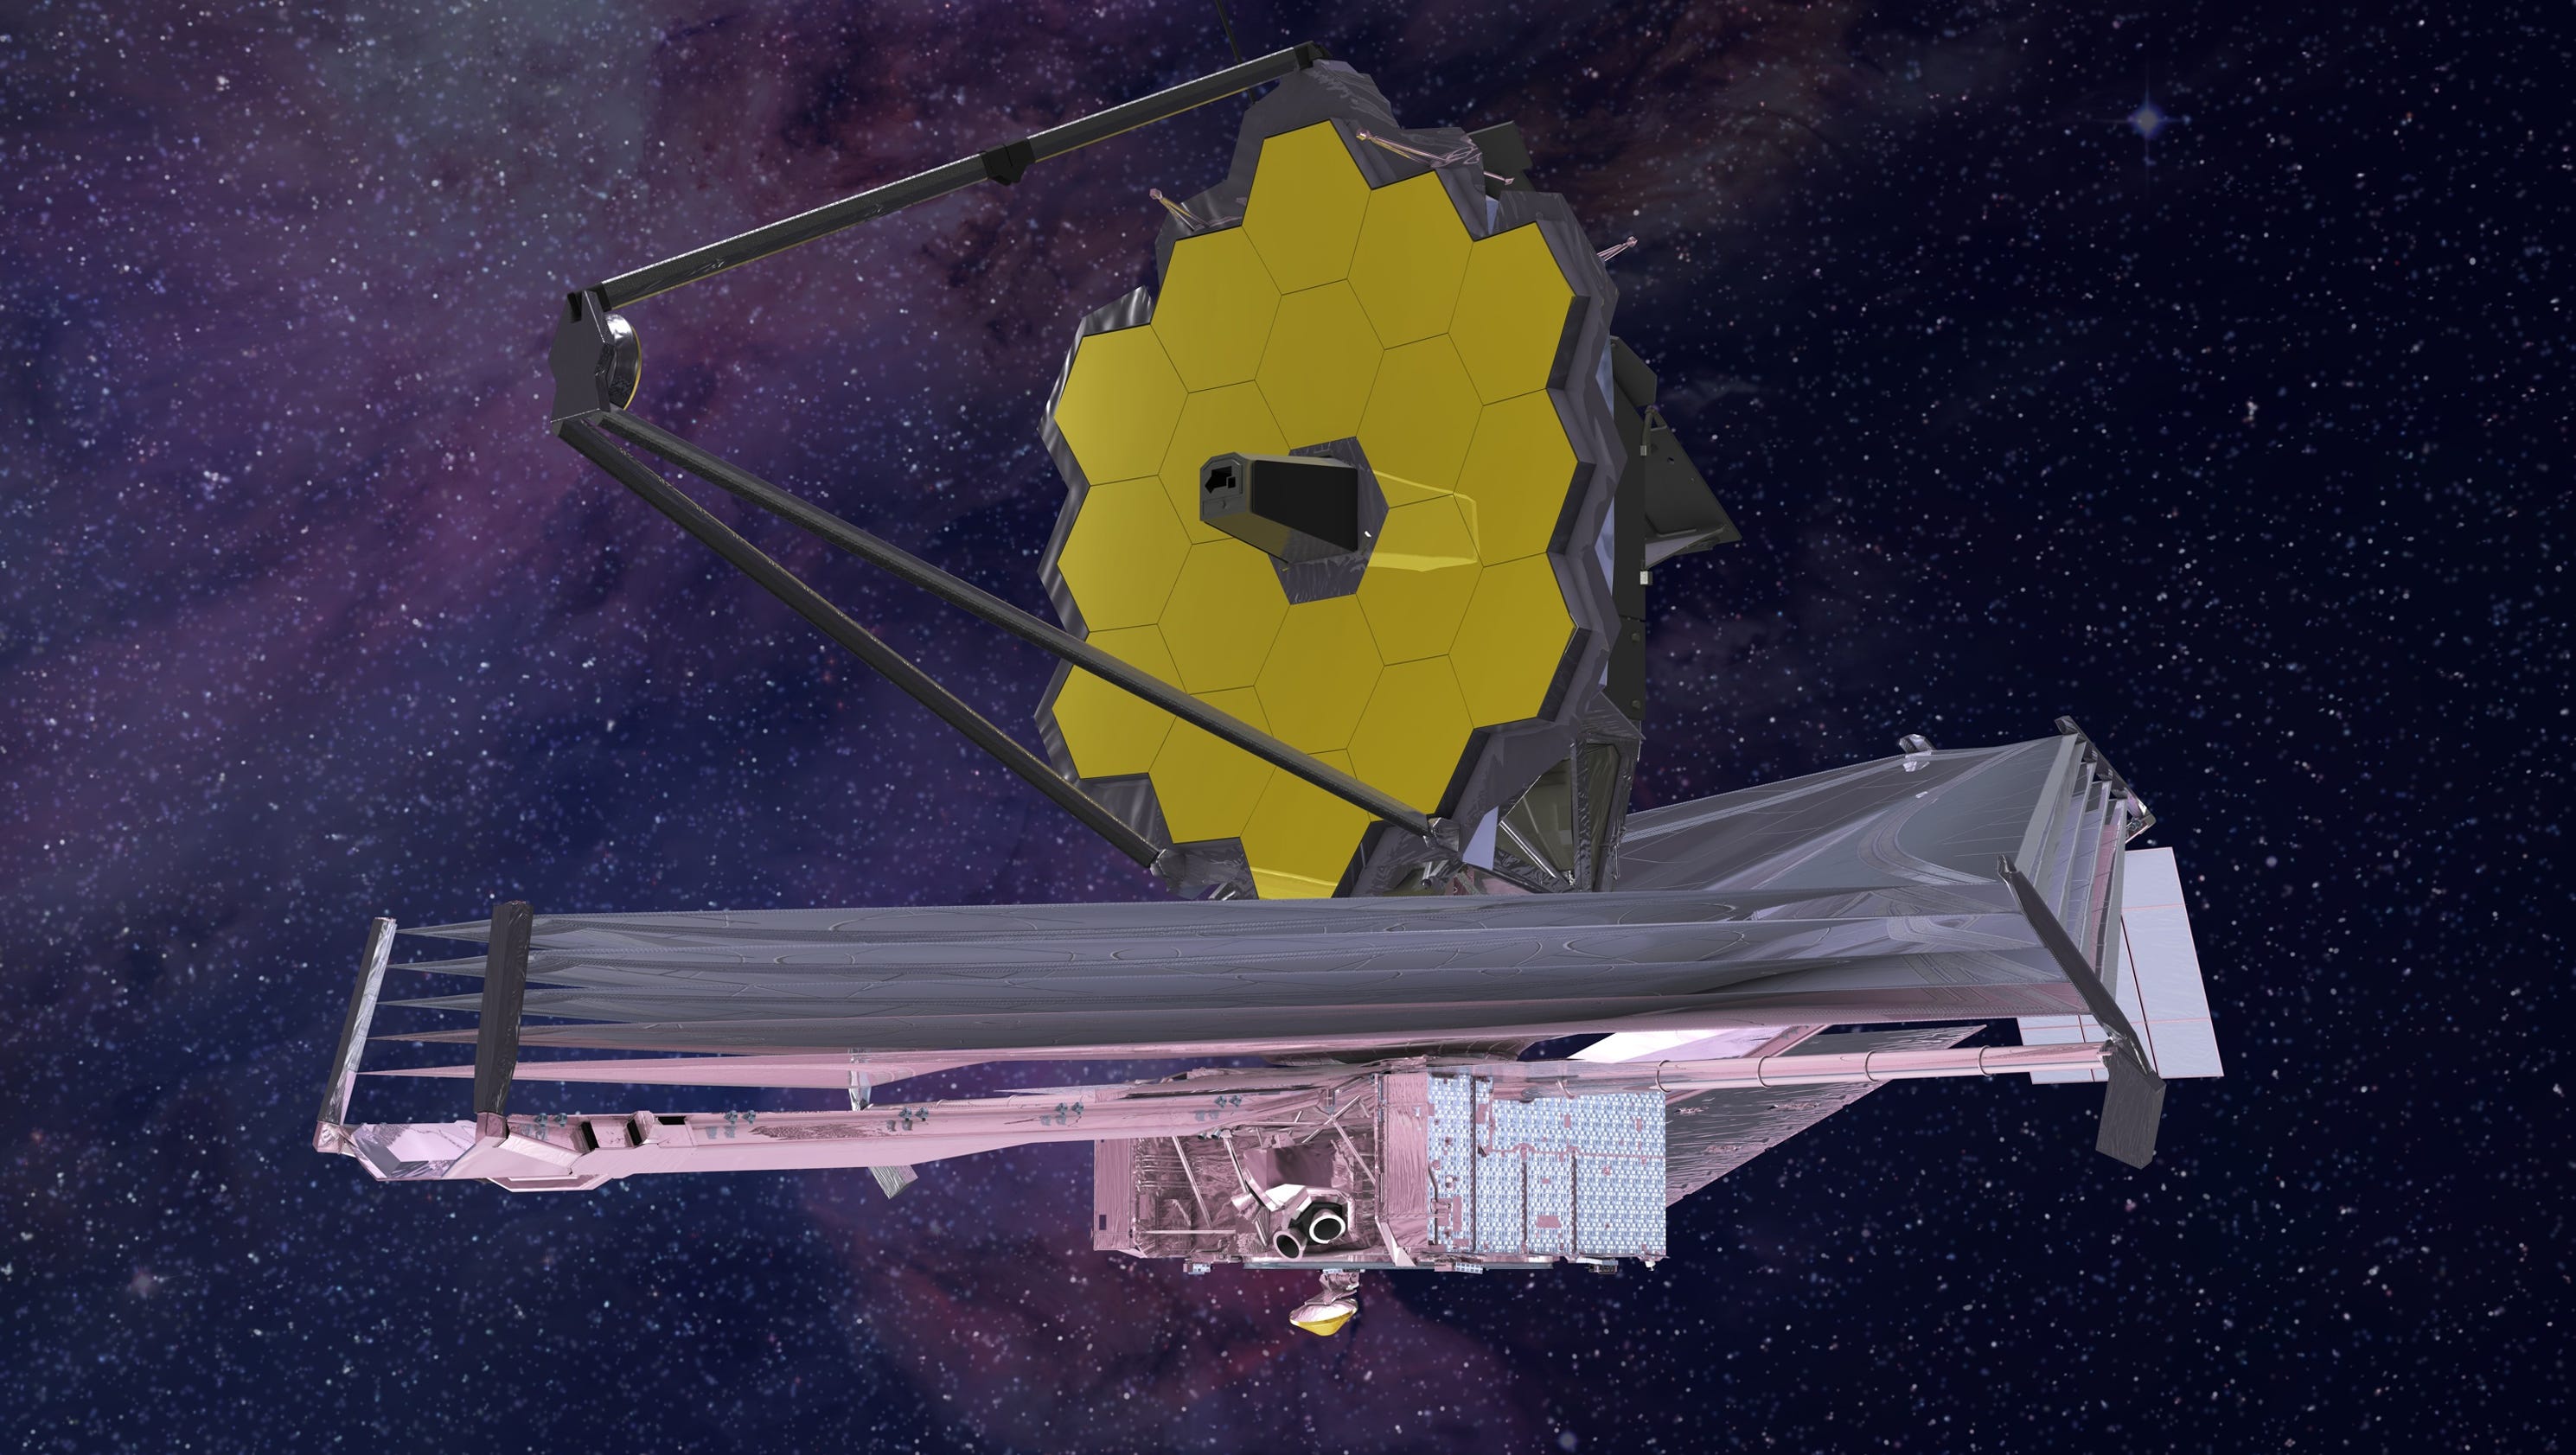 james-webb-space-telescope-launch-delayed-until-2021-cost-now-10b